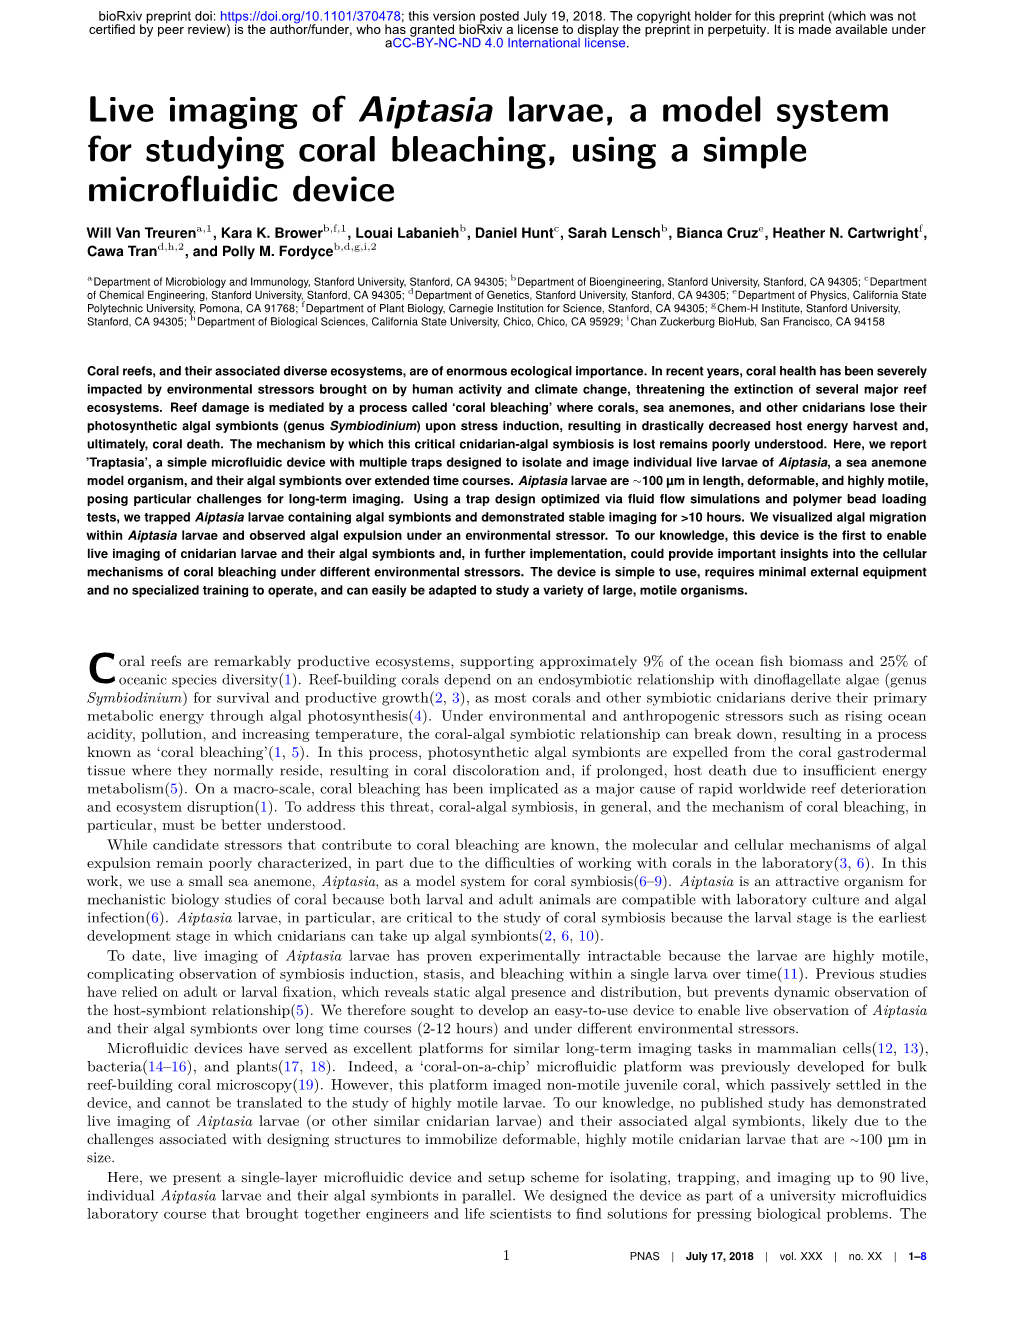 Live Imaging of Aiptasia Larvae, a Model System for Studying Coral Bleaching, Using a Simple Microfluidic Device